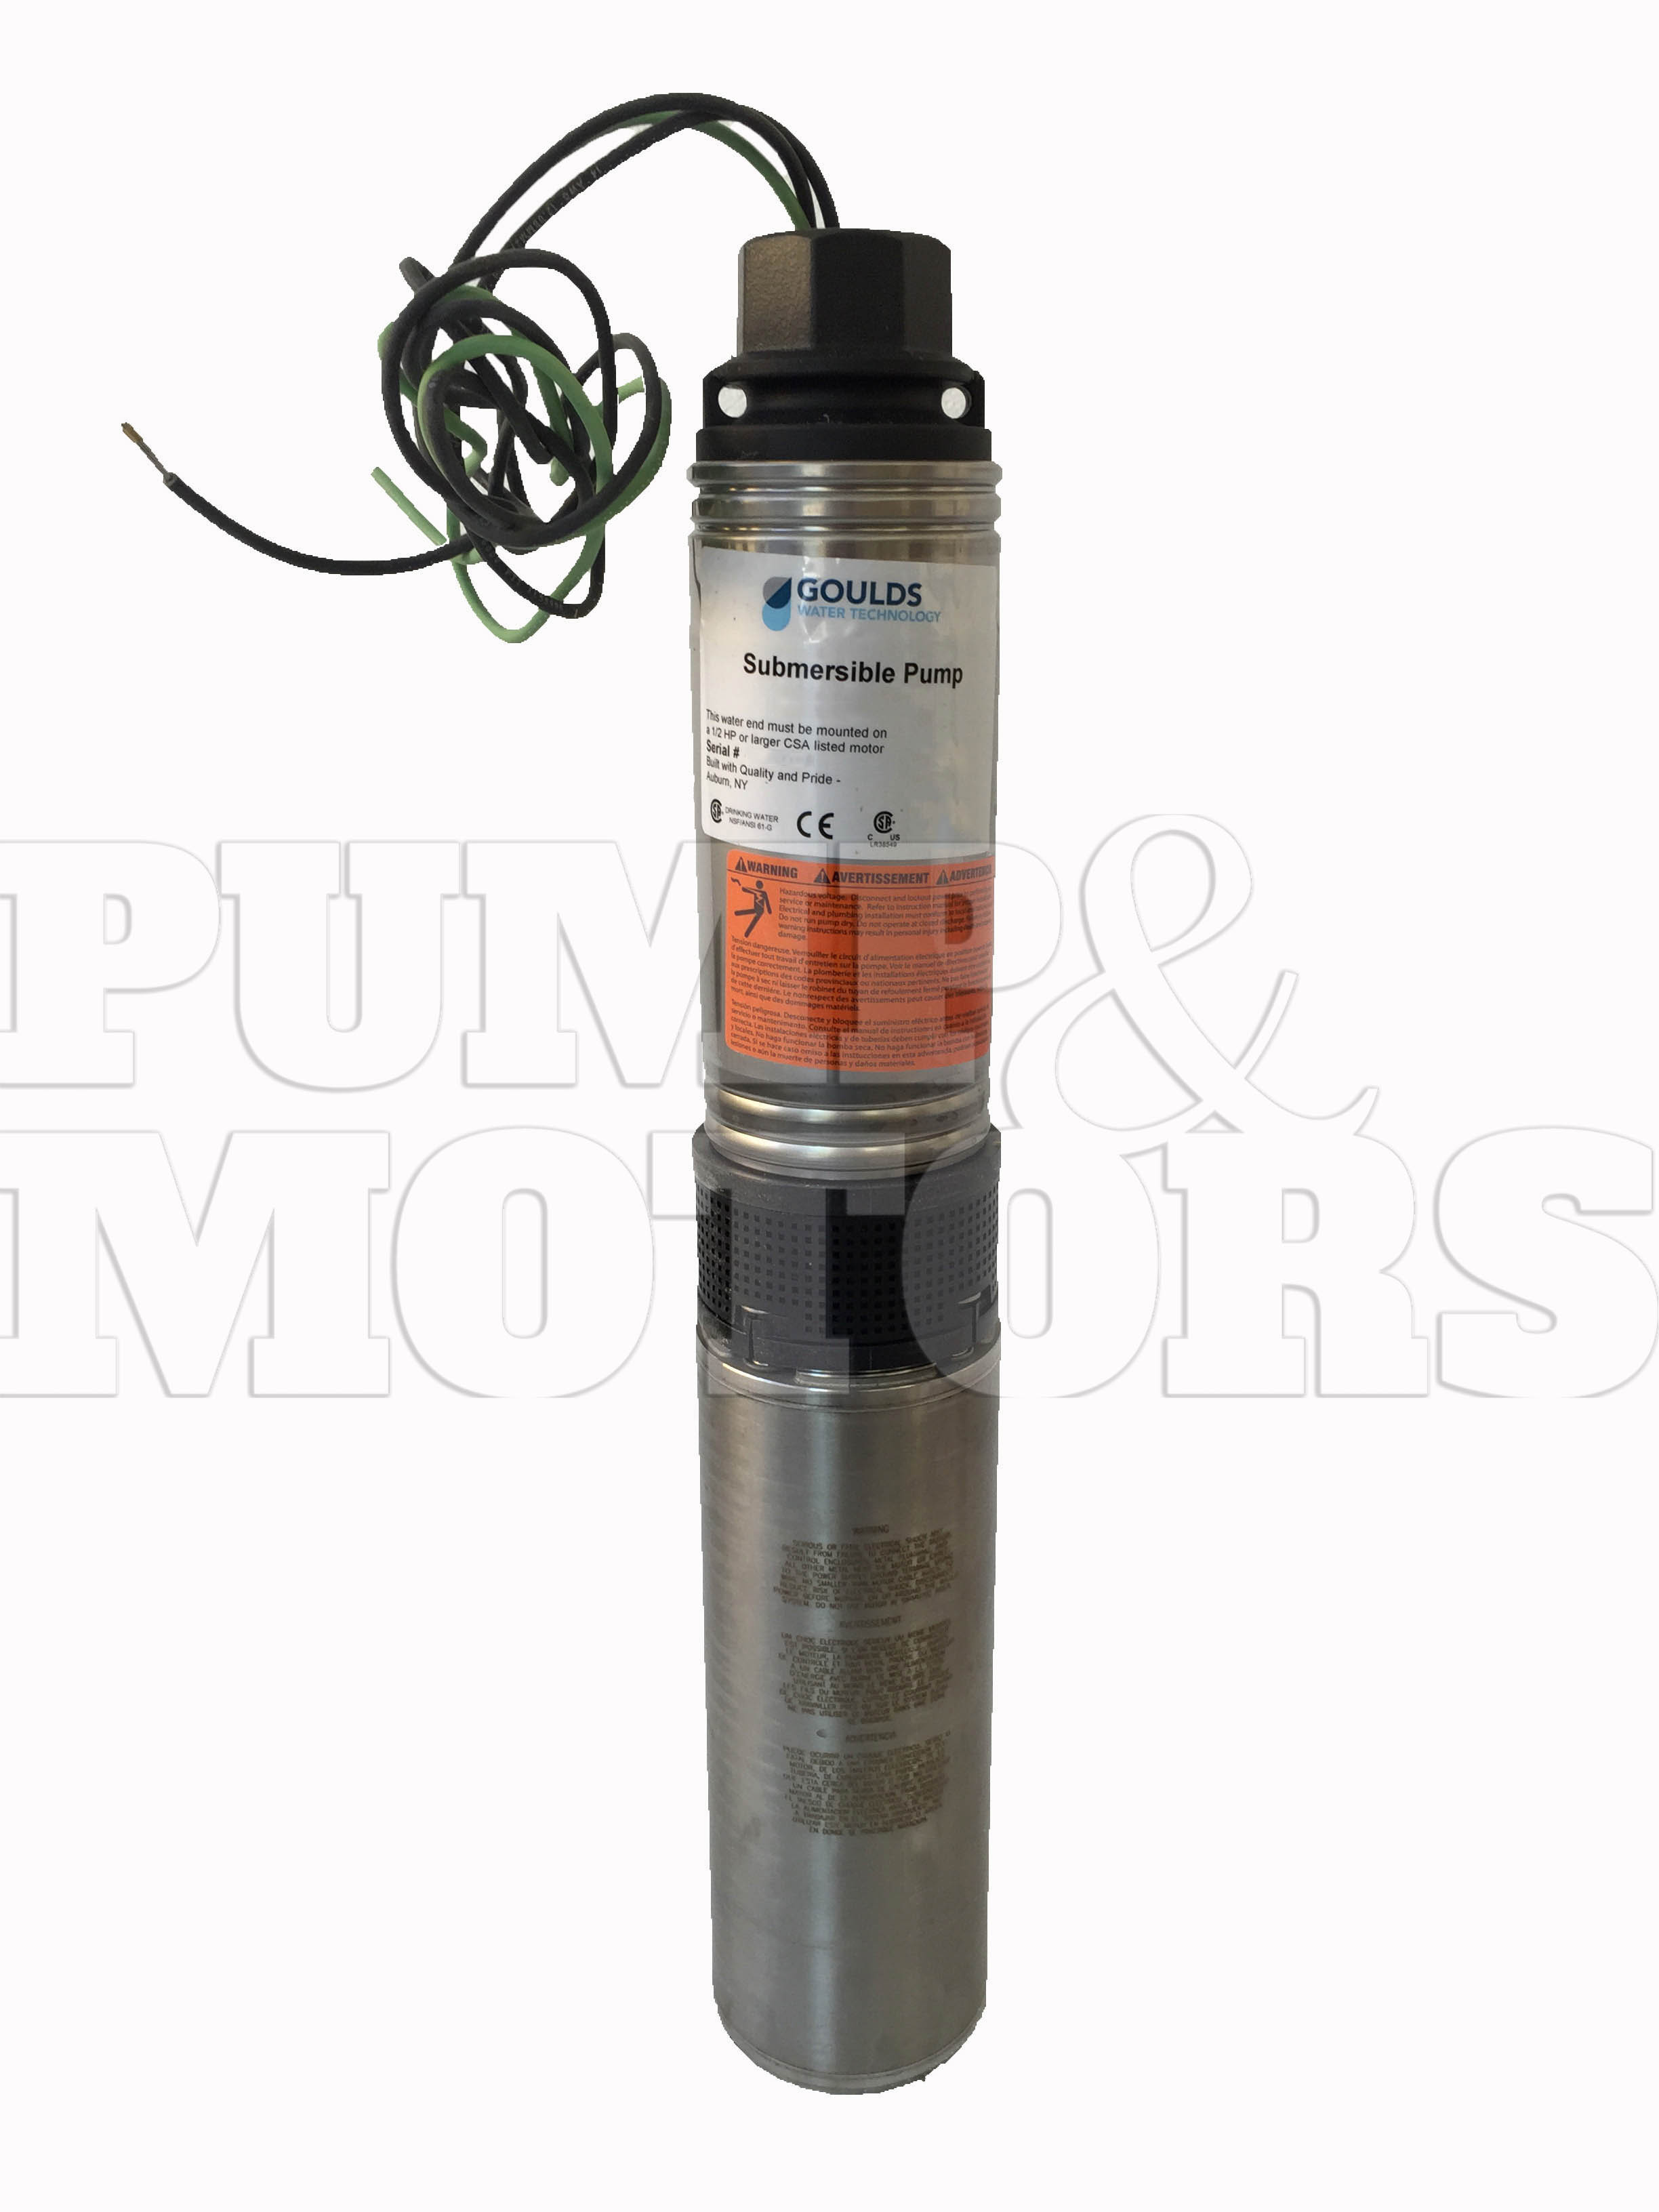 Goulds 225H30 8 6" Submersible Water Well Pump End 225GPM 30HP